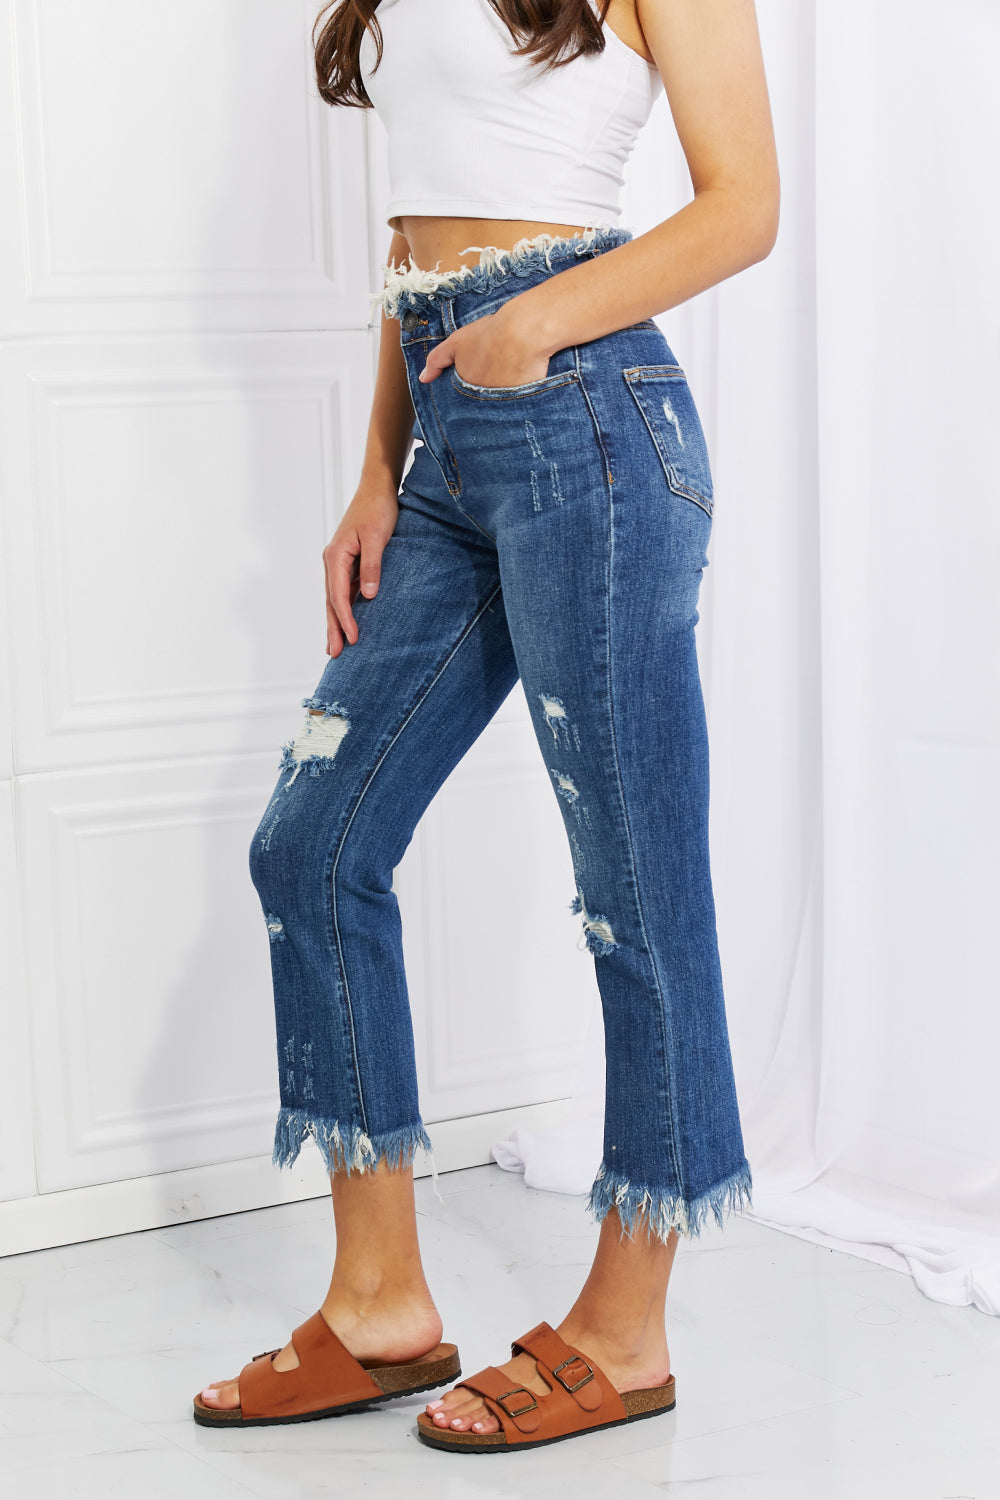 Chic Straight Leg Jeans' highlighting a pair of jeans with a stylish straight leg cut, perfect for a fashionable and versatile wardrobe staple.